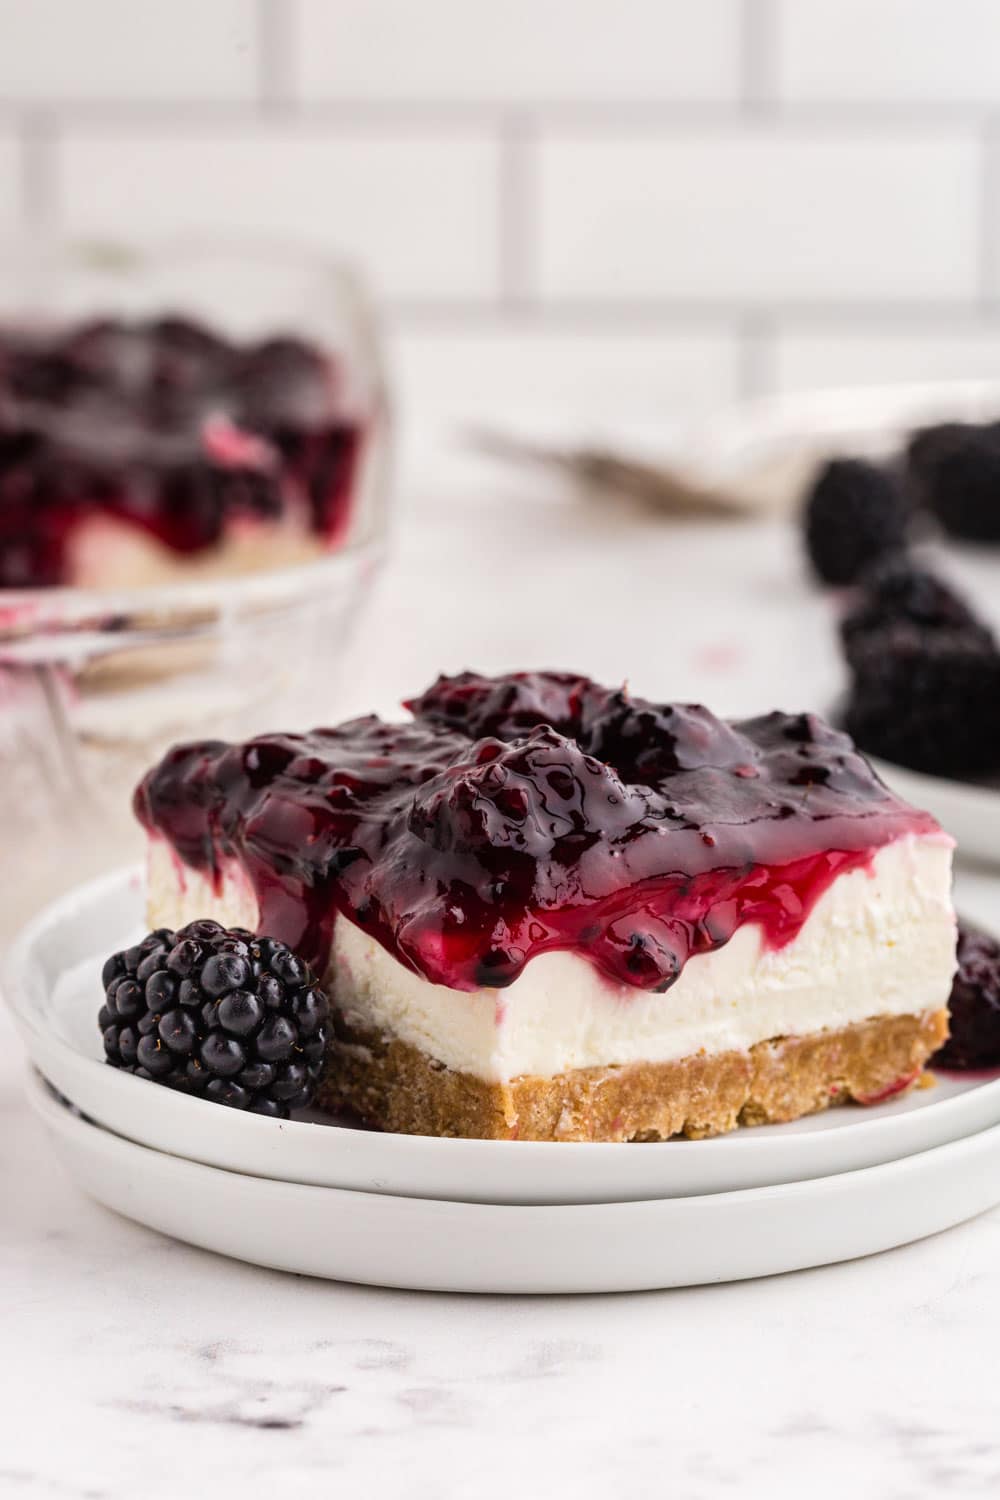 Slice of no-bake blackberry cheesecake on white cake plates, baking dish with blackberry cheesecake, bowl of fresh blackberries, on a white marble surface with white stacked tiles in the background.